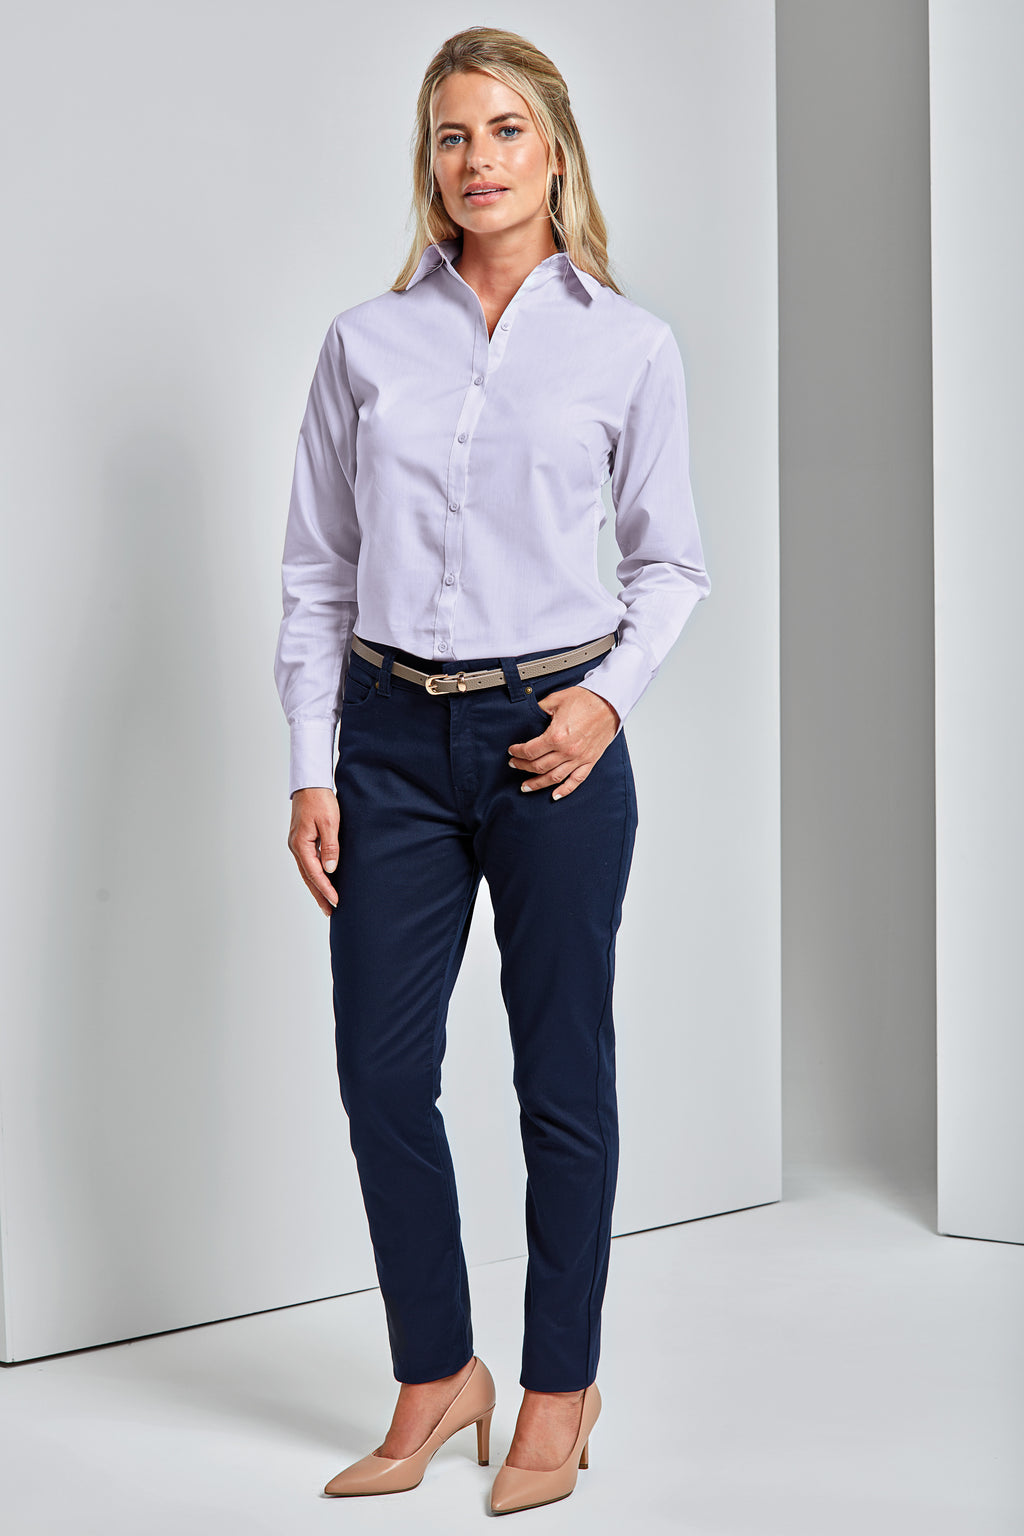 Women's performance chino jeans - Premier Collection